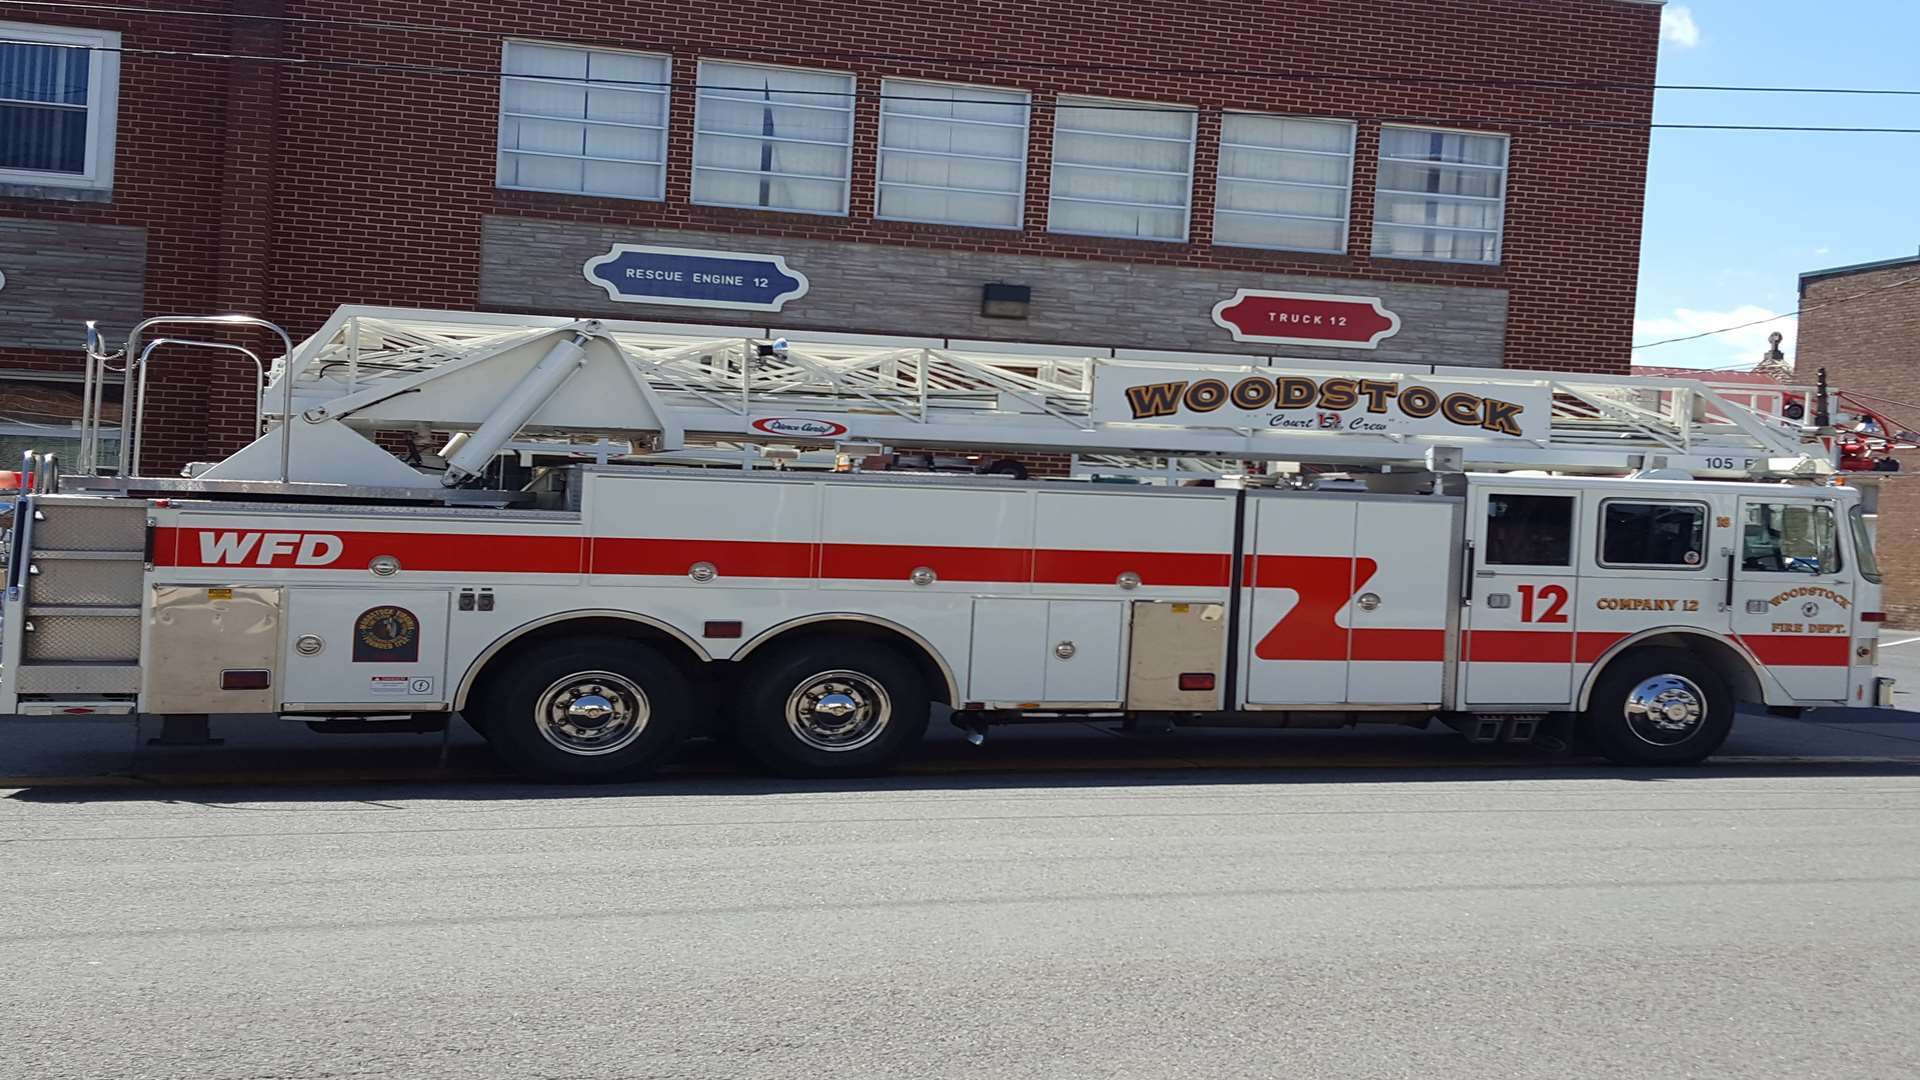 The decommissioned Woodstock Fire Department in Virginia was facing being scrapped